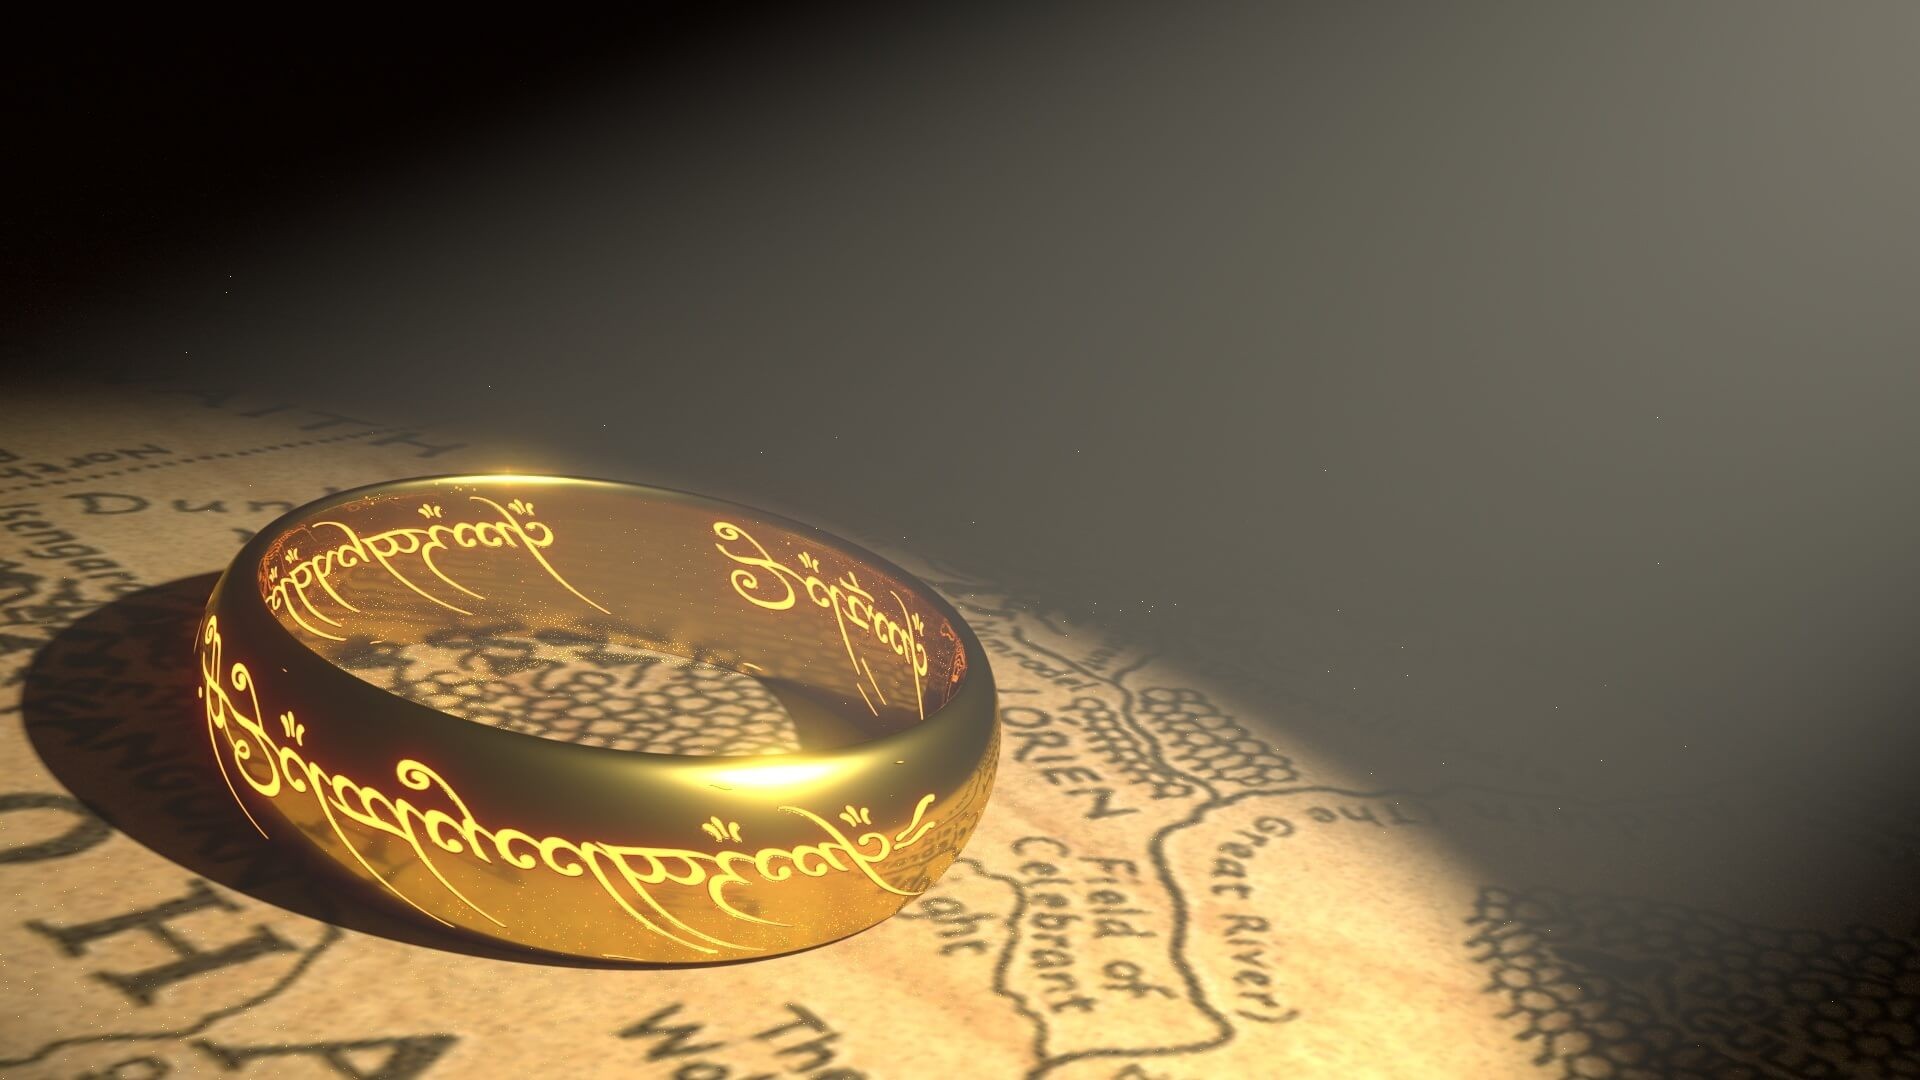 The Lord of the Rings, Rings, The One Ring, Map, Middle earth, Text, Closeup Wallpaper